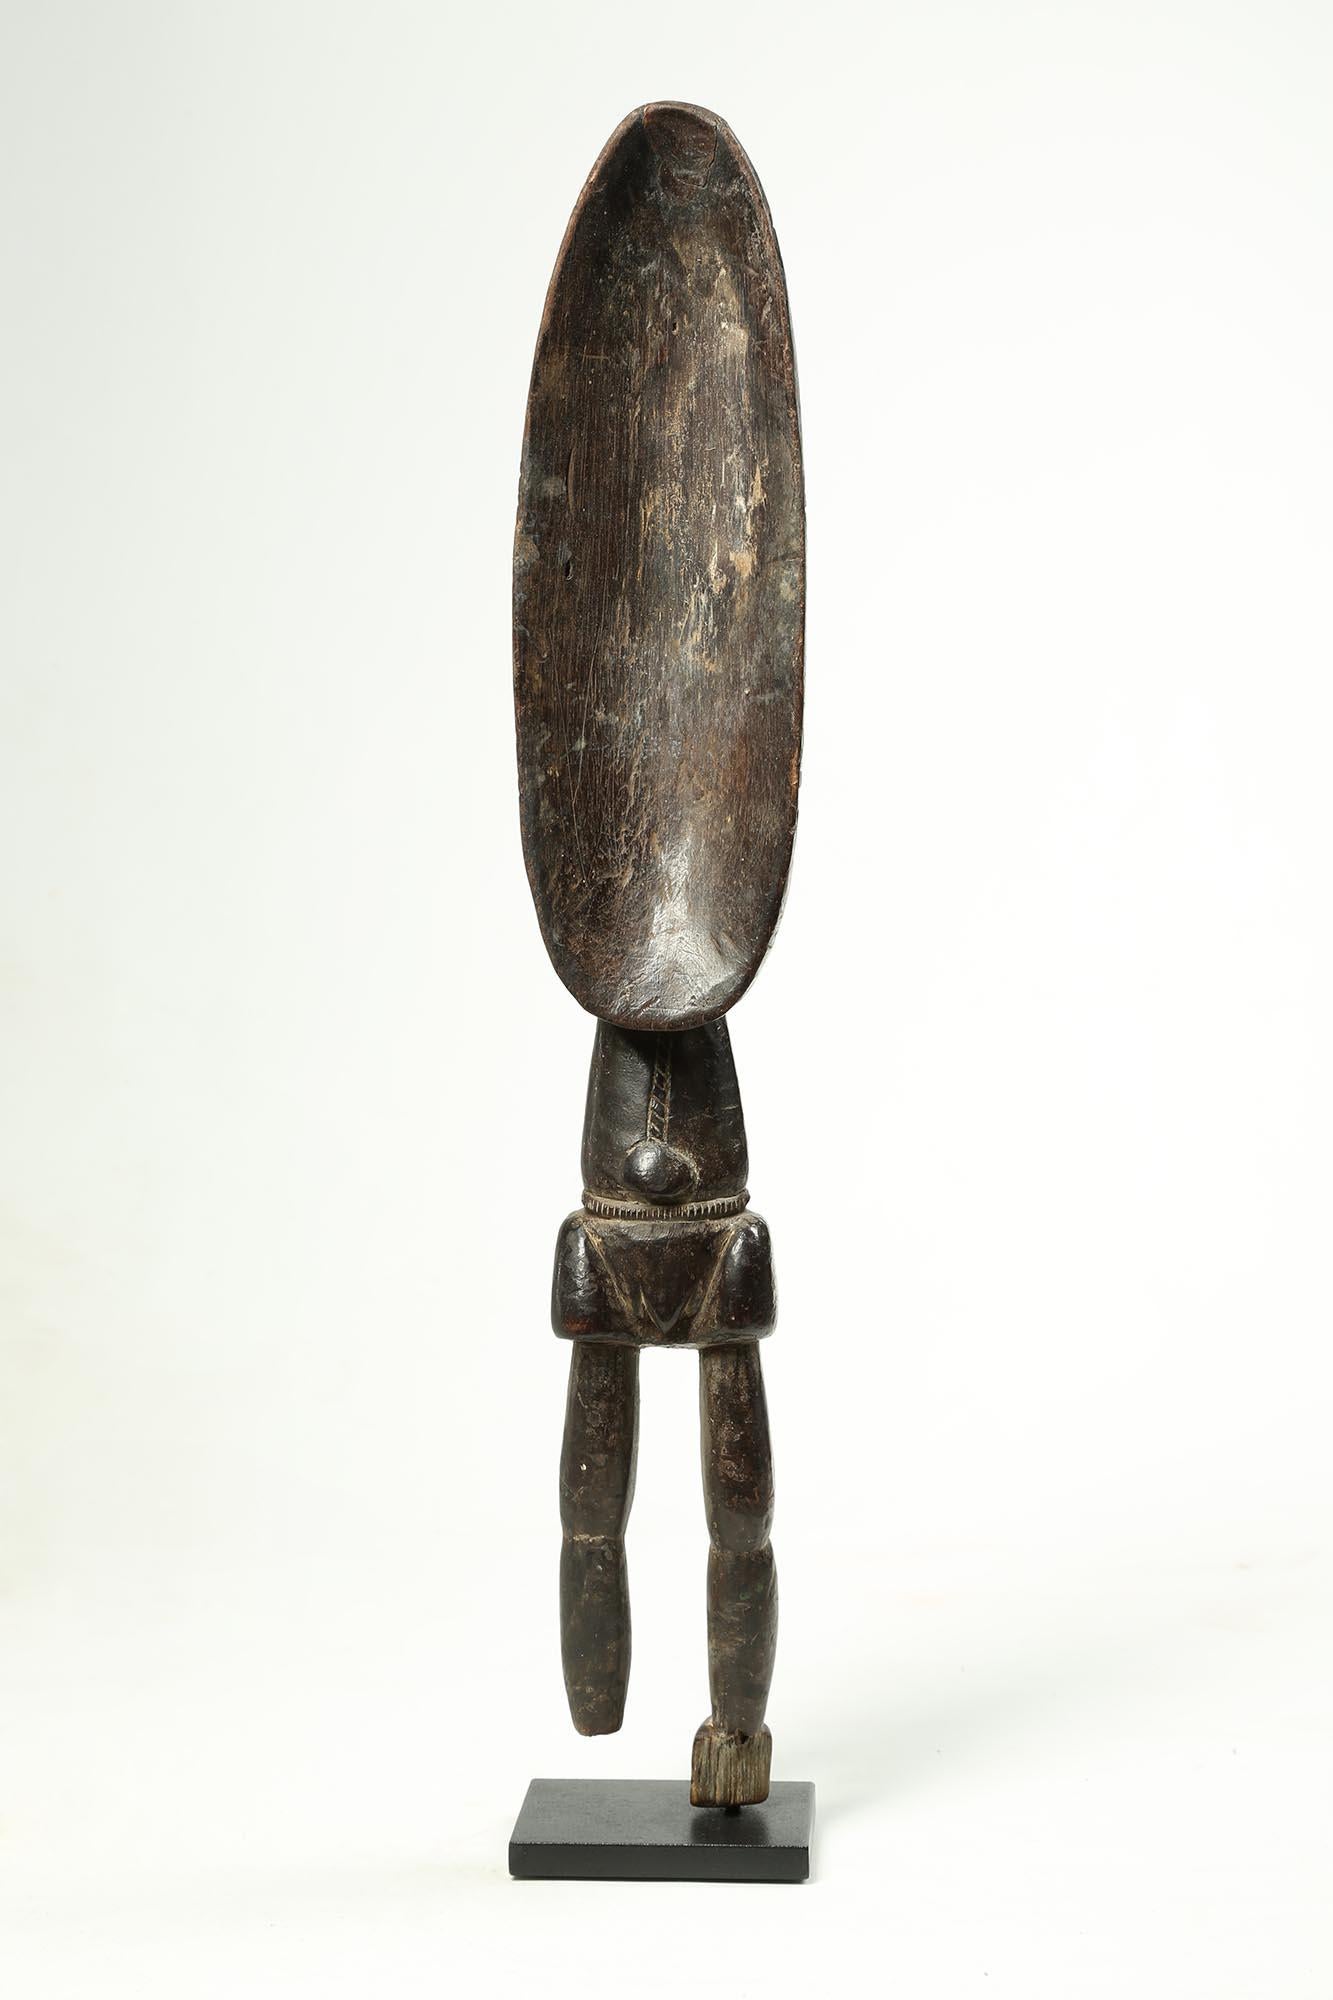 Large, stylized human wood serving spoon from the Dan People, Ivory Coast, Africa. Standing human figure with spoon bowl representing the upper body and head, with two legs, note that the feet are broken and worn from use. Pronounced navel and